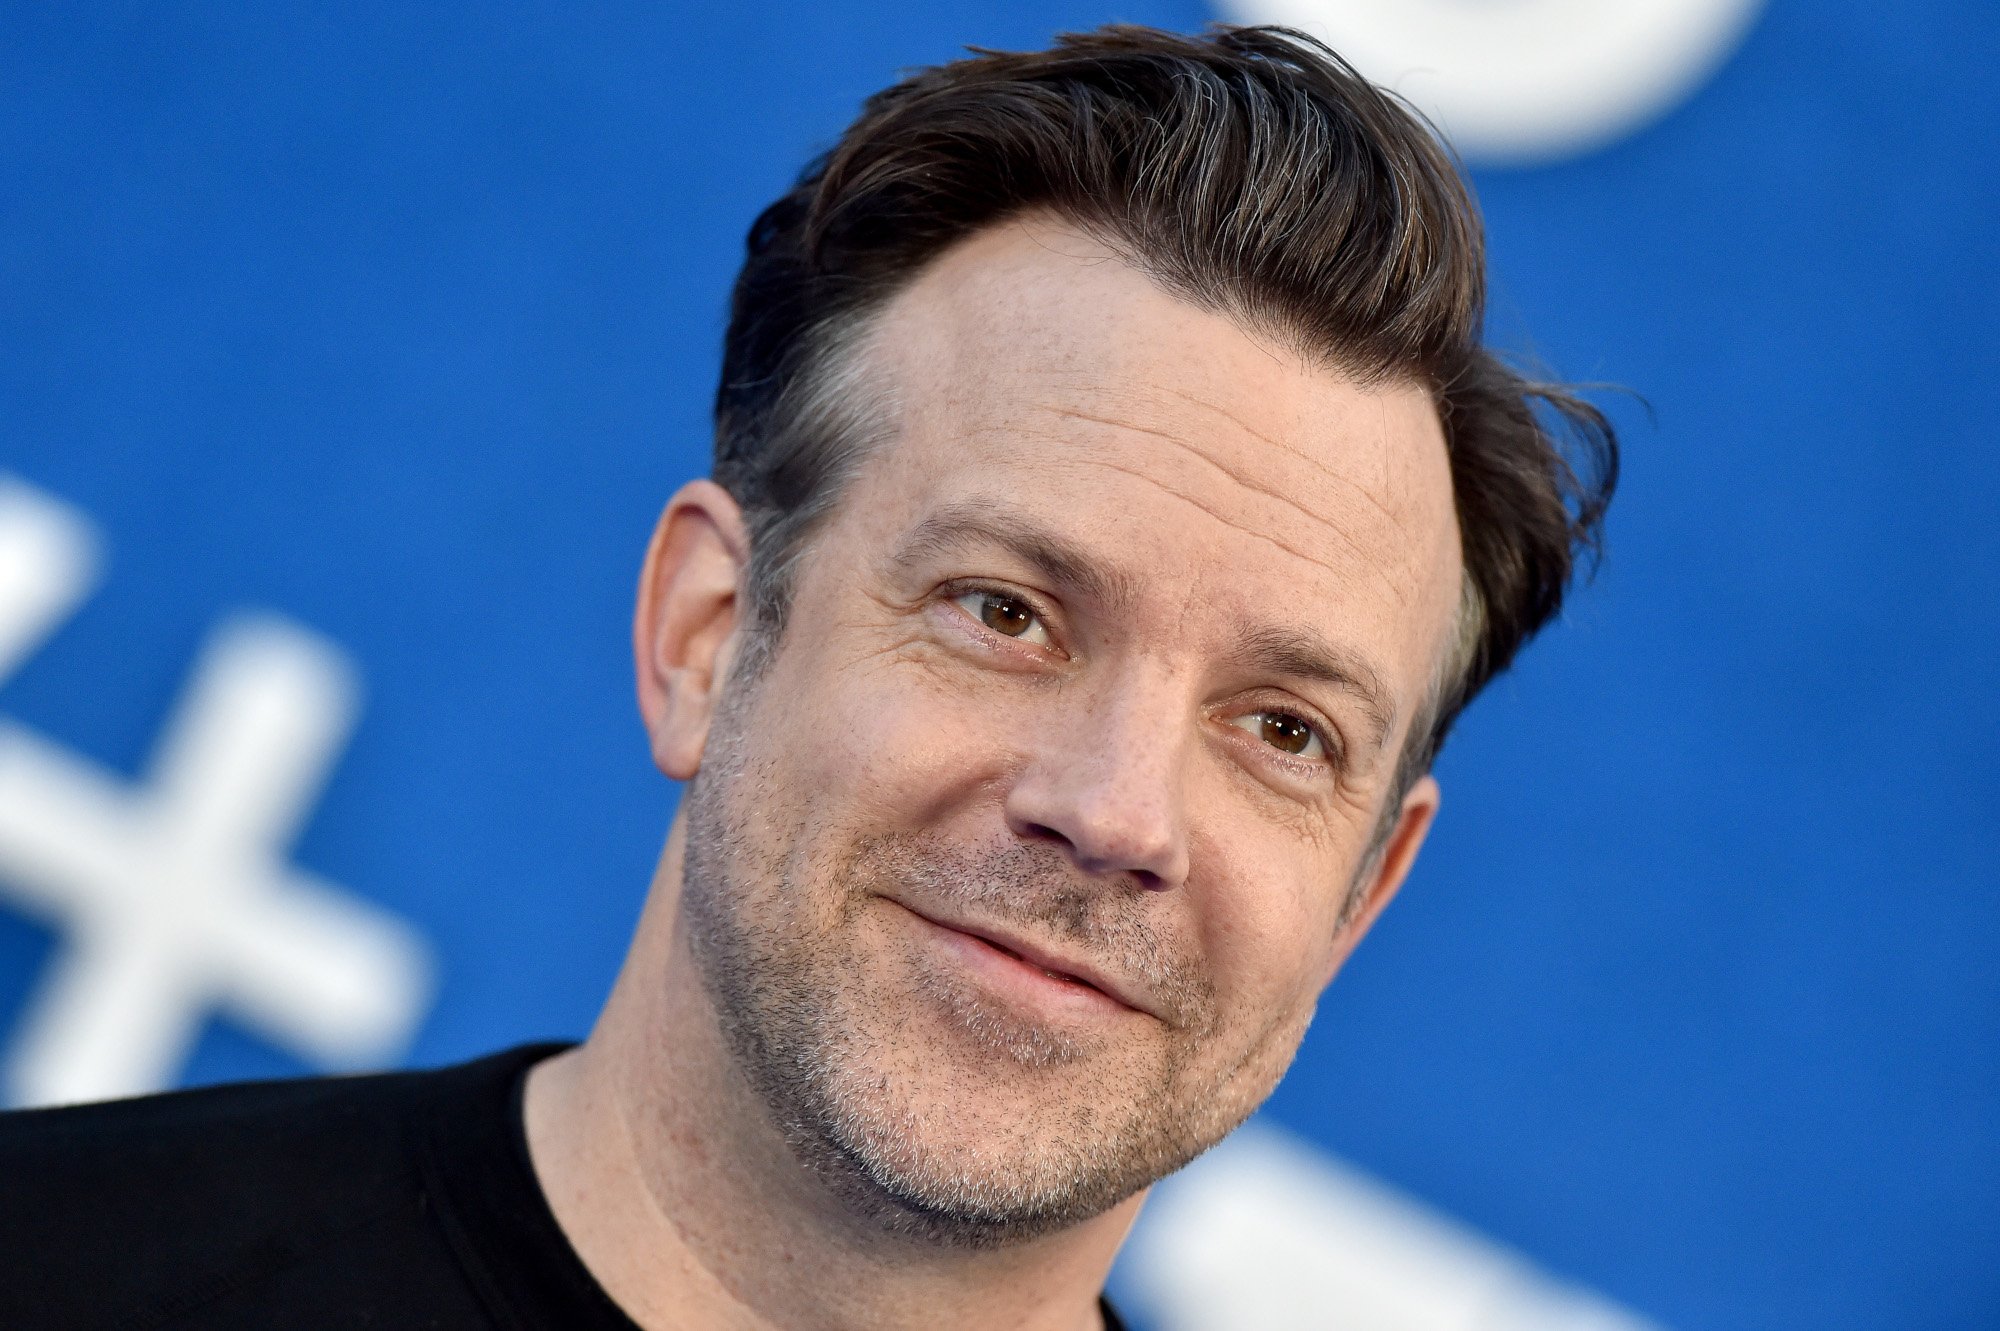 'Ted Lasso' star Jason Sudeikis, who will star in Marvel's 'Hit-Monkey' series coming to Hulu. He's wearing a black shirt, and his brown hair is slicked back.